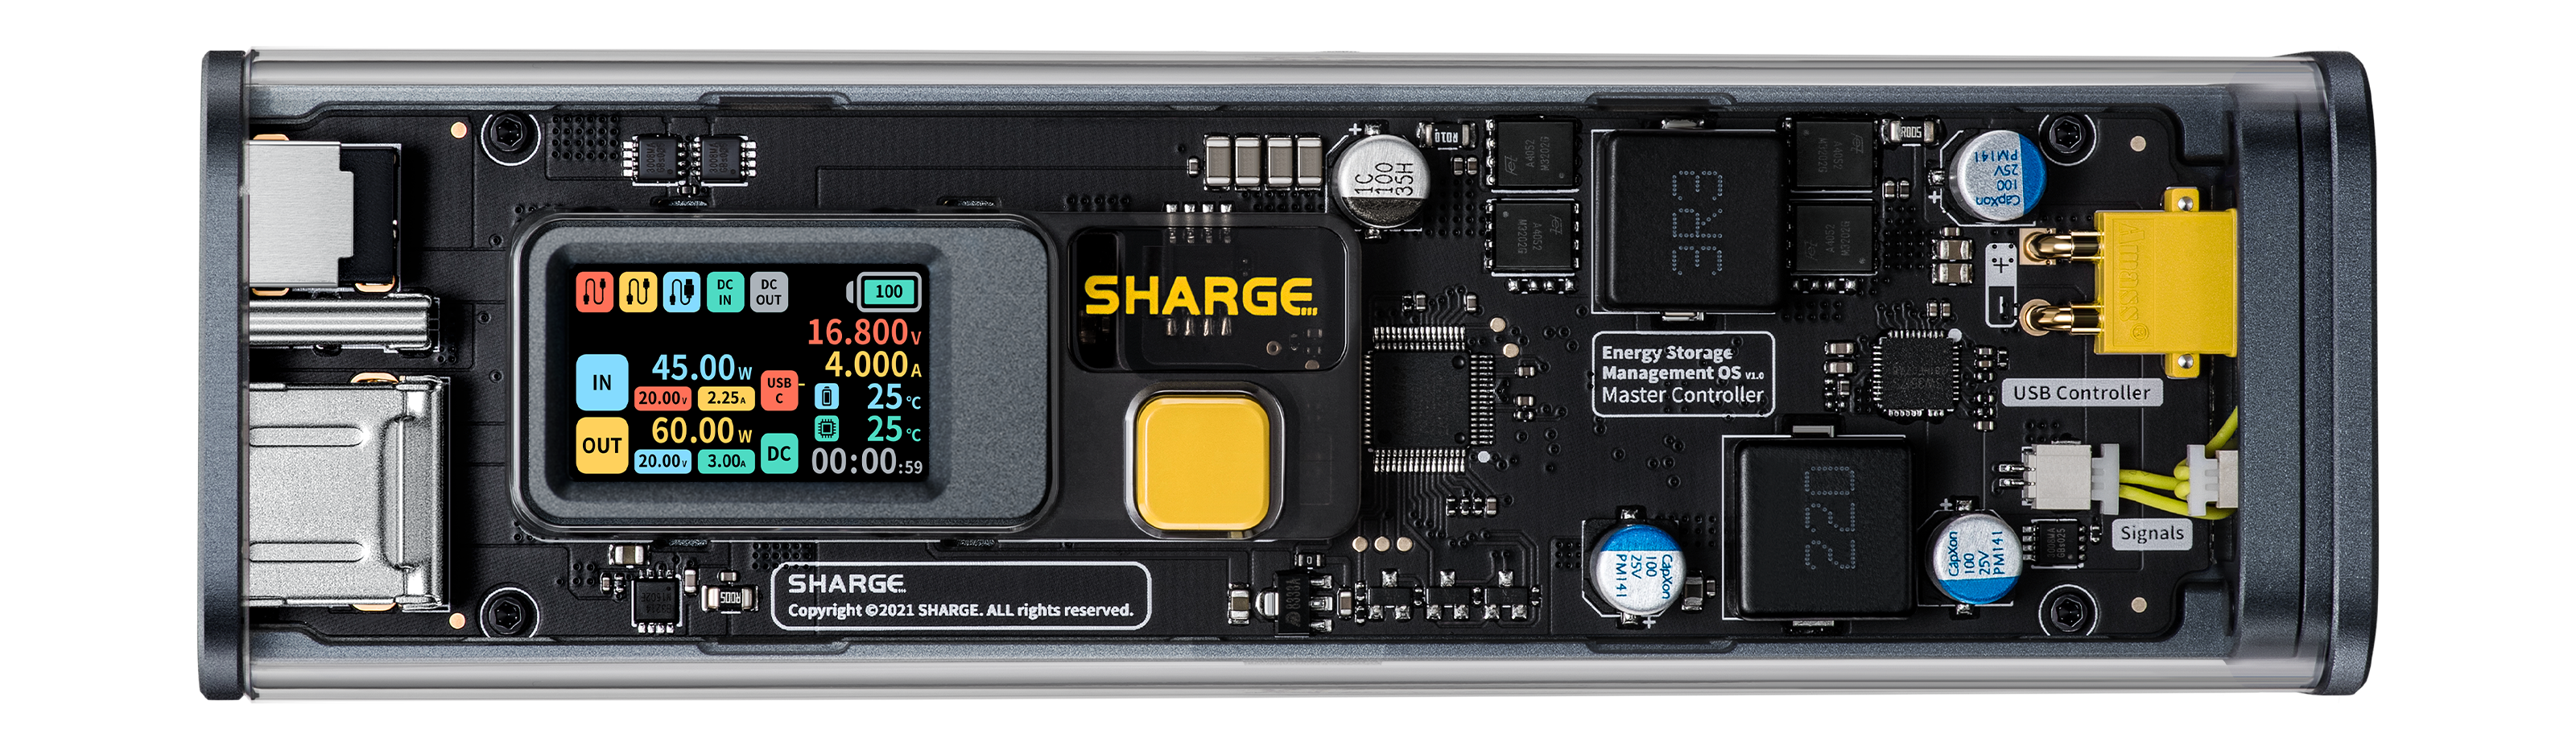 Sharge 100W Transparent Super Charger Power Bank 25600mAh